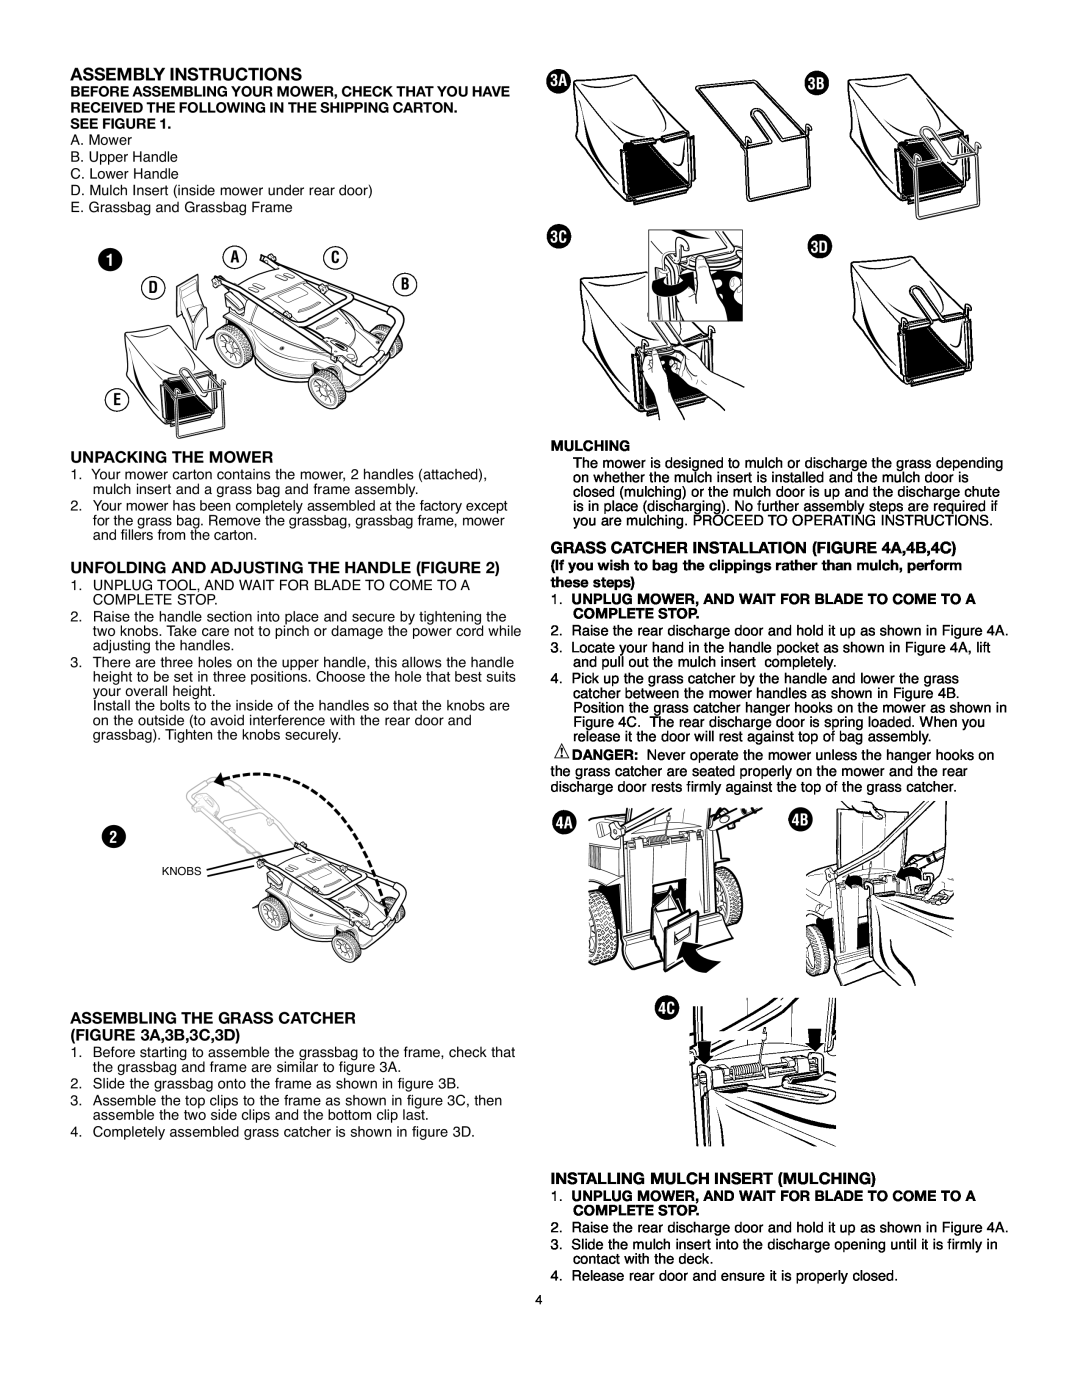 Black & Decker MM875 Assembly Instructions, Unpacking The Mower, Unfolding And Adjusting The Handle Figure, 3C 3D 